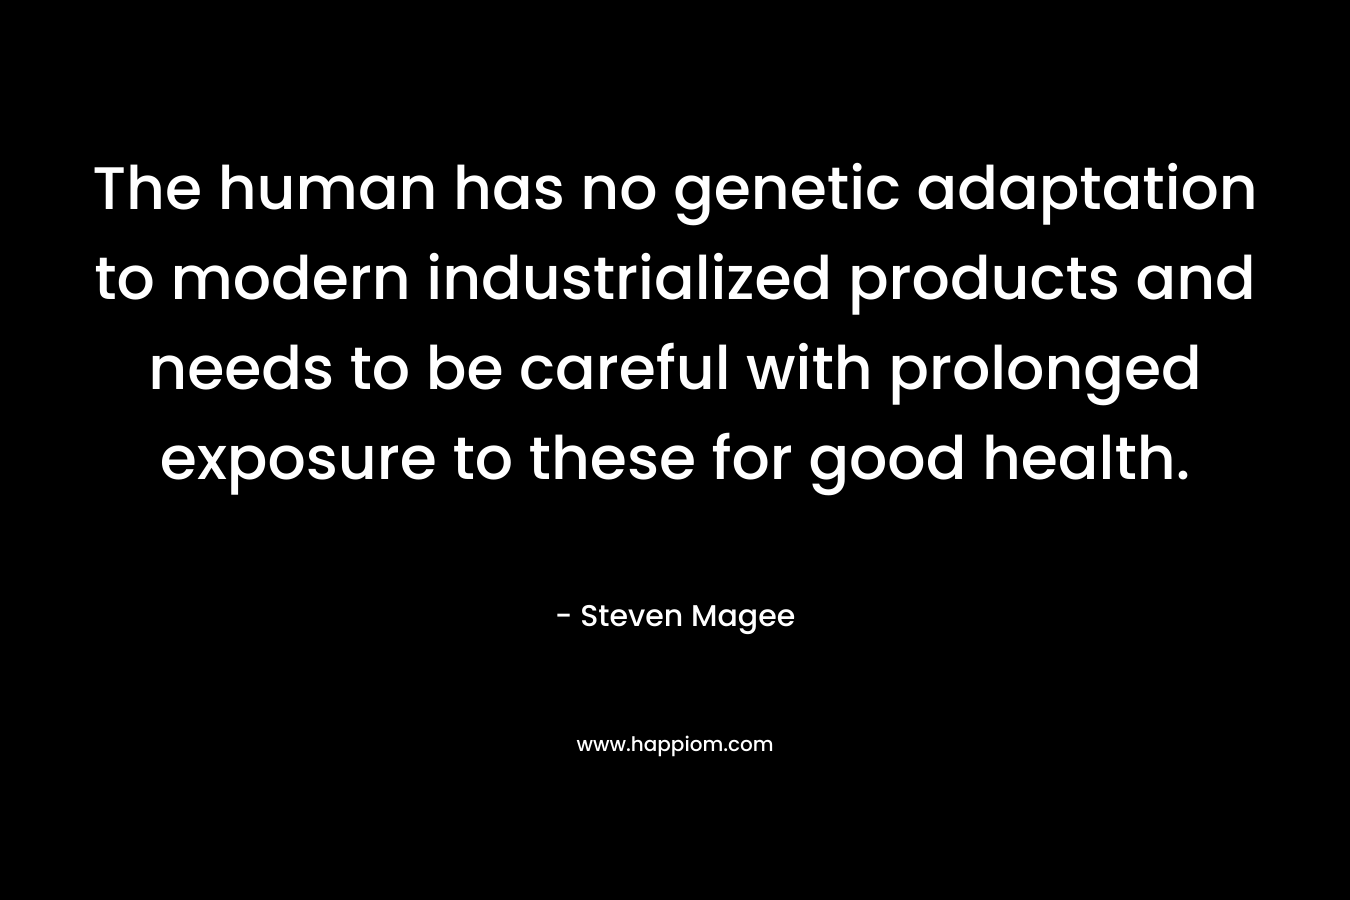 The human has no genetic adaptation to modern industrialized products and needs to be careful with prolonged exposure to these for good health.